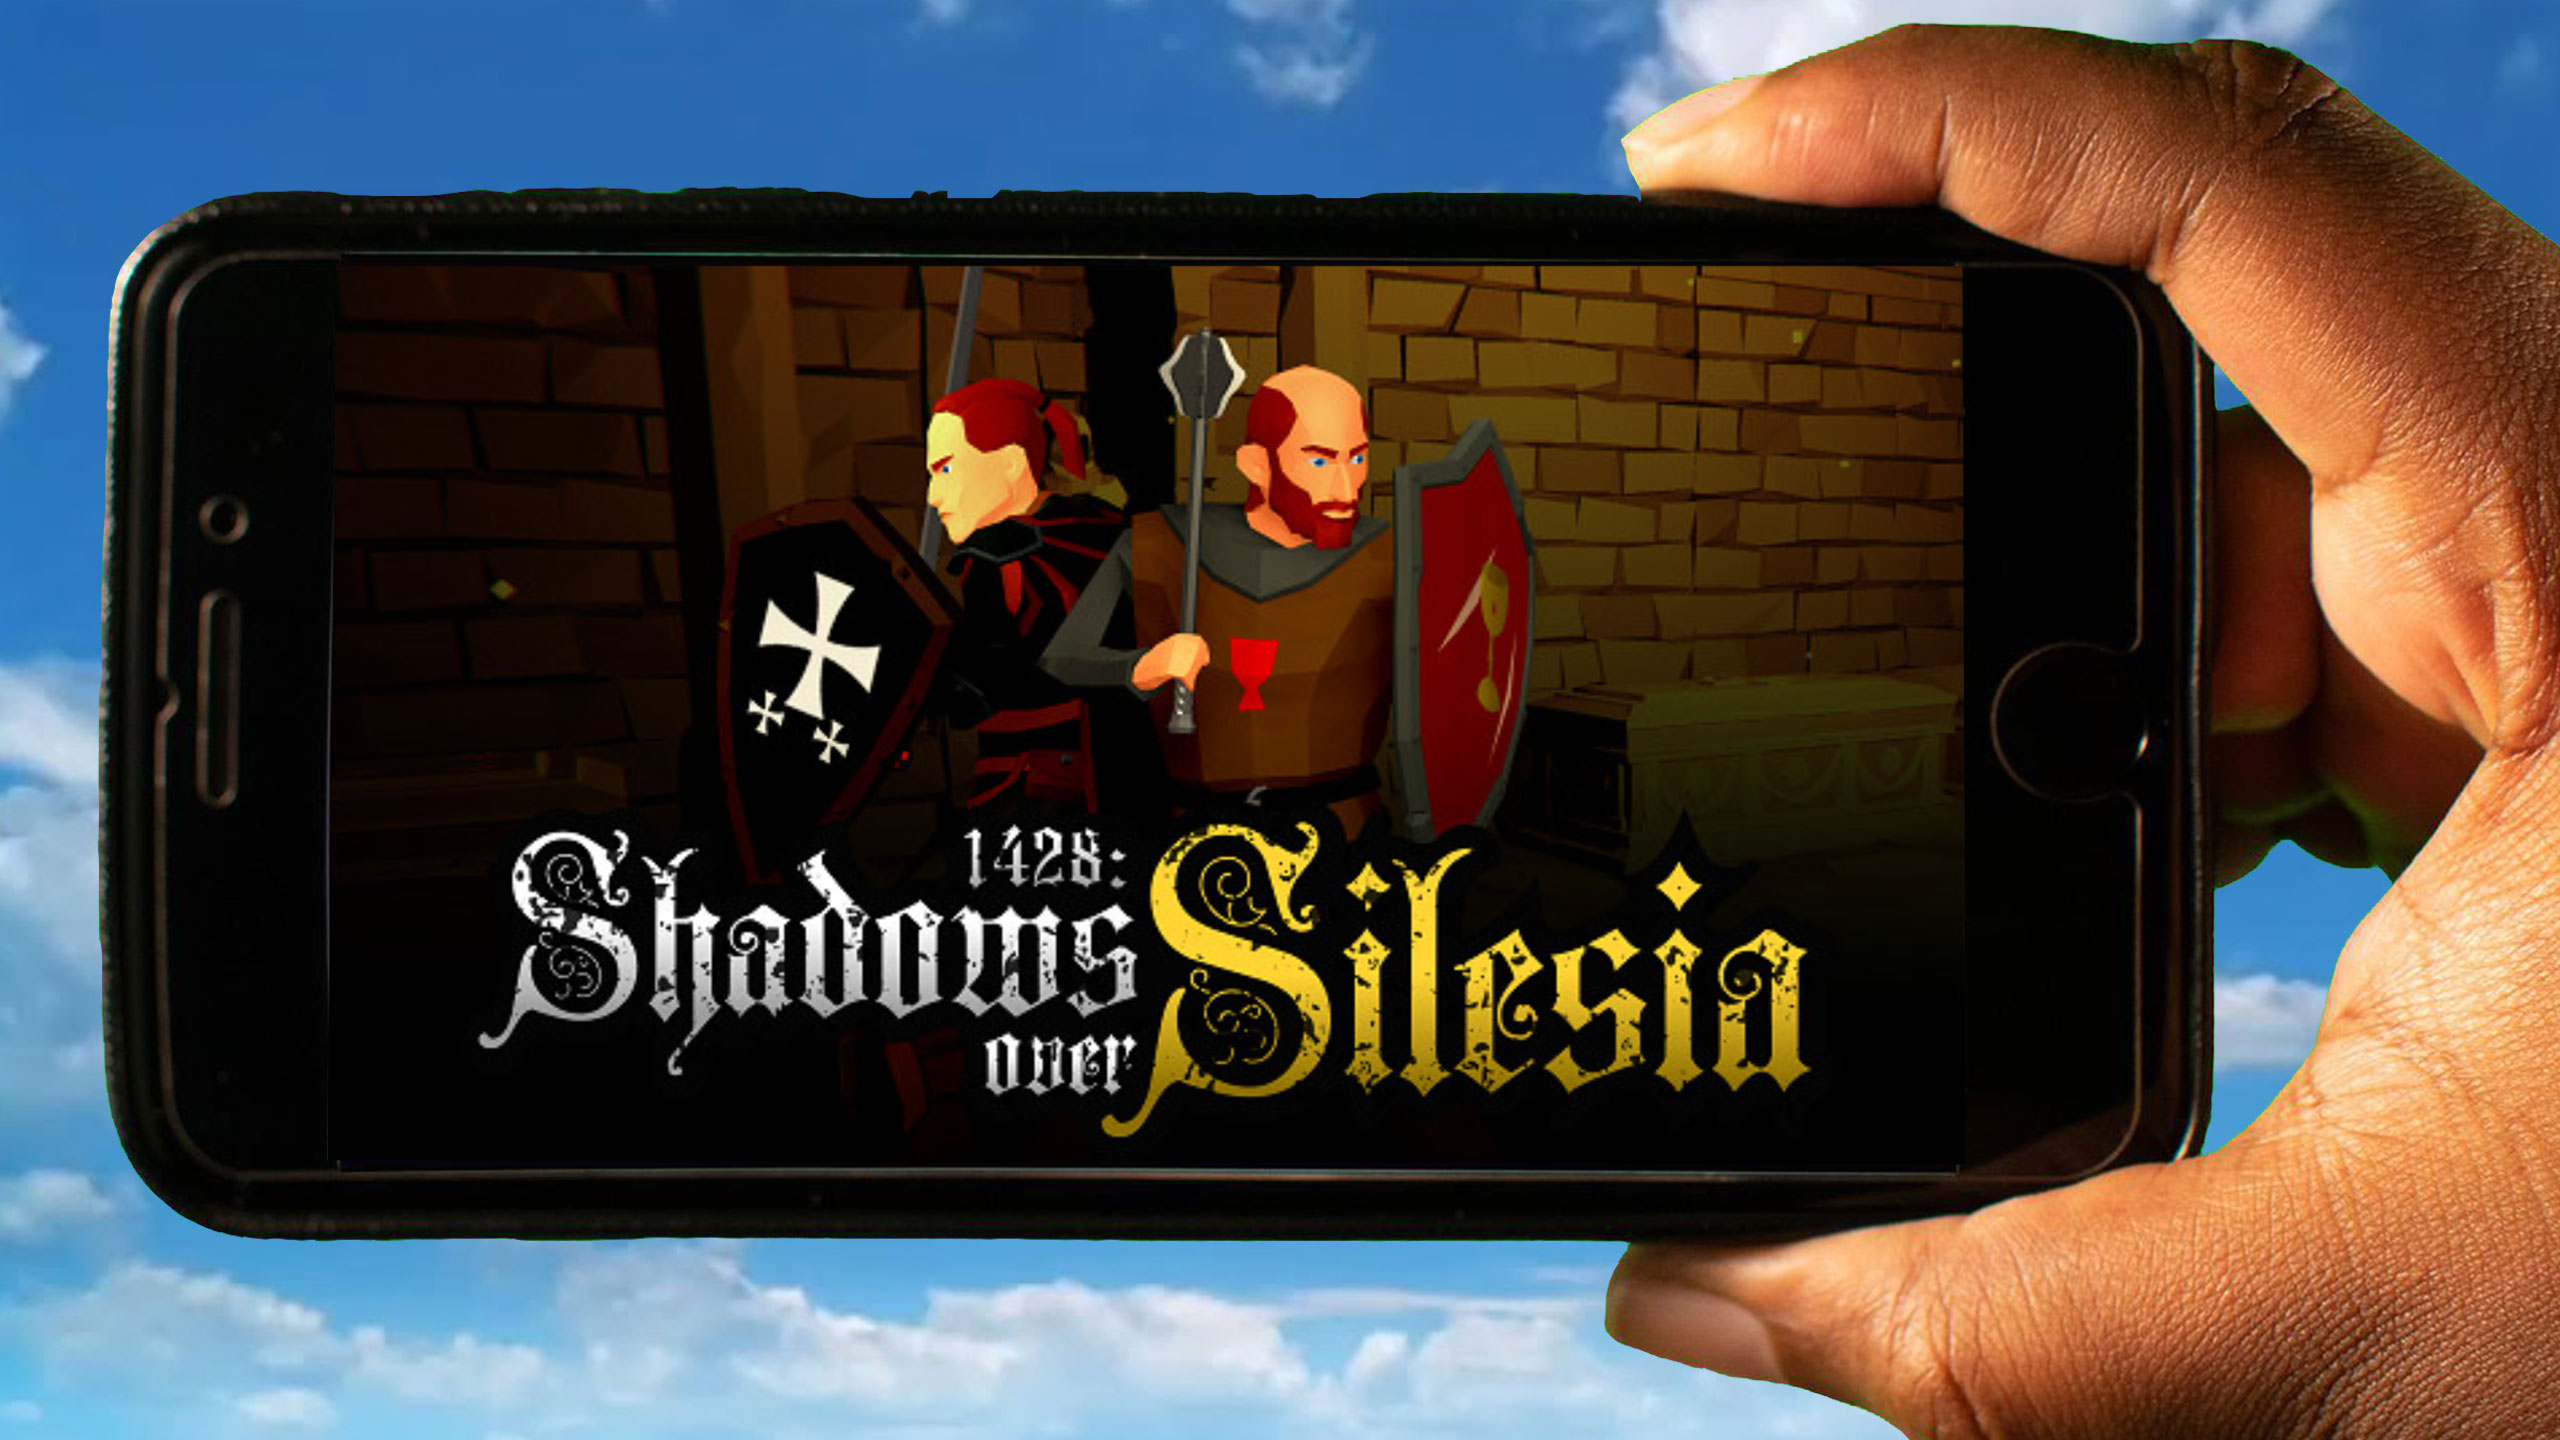 1428: Shadows over Silesia instal the new for android